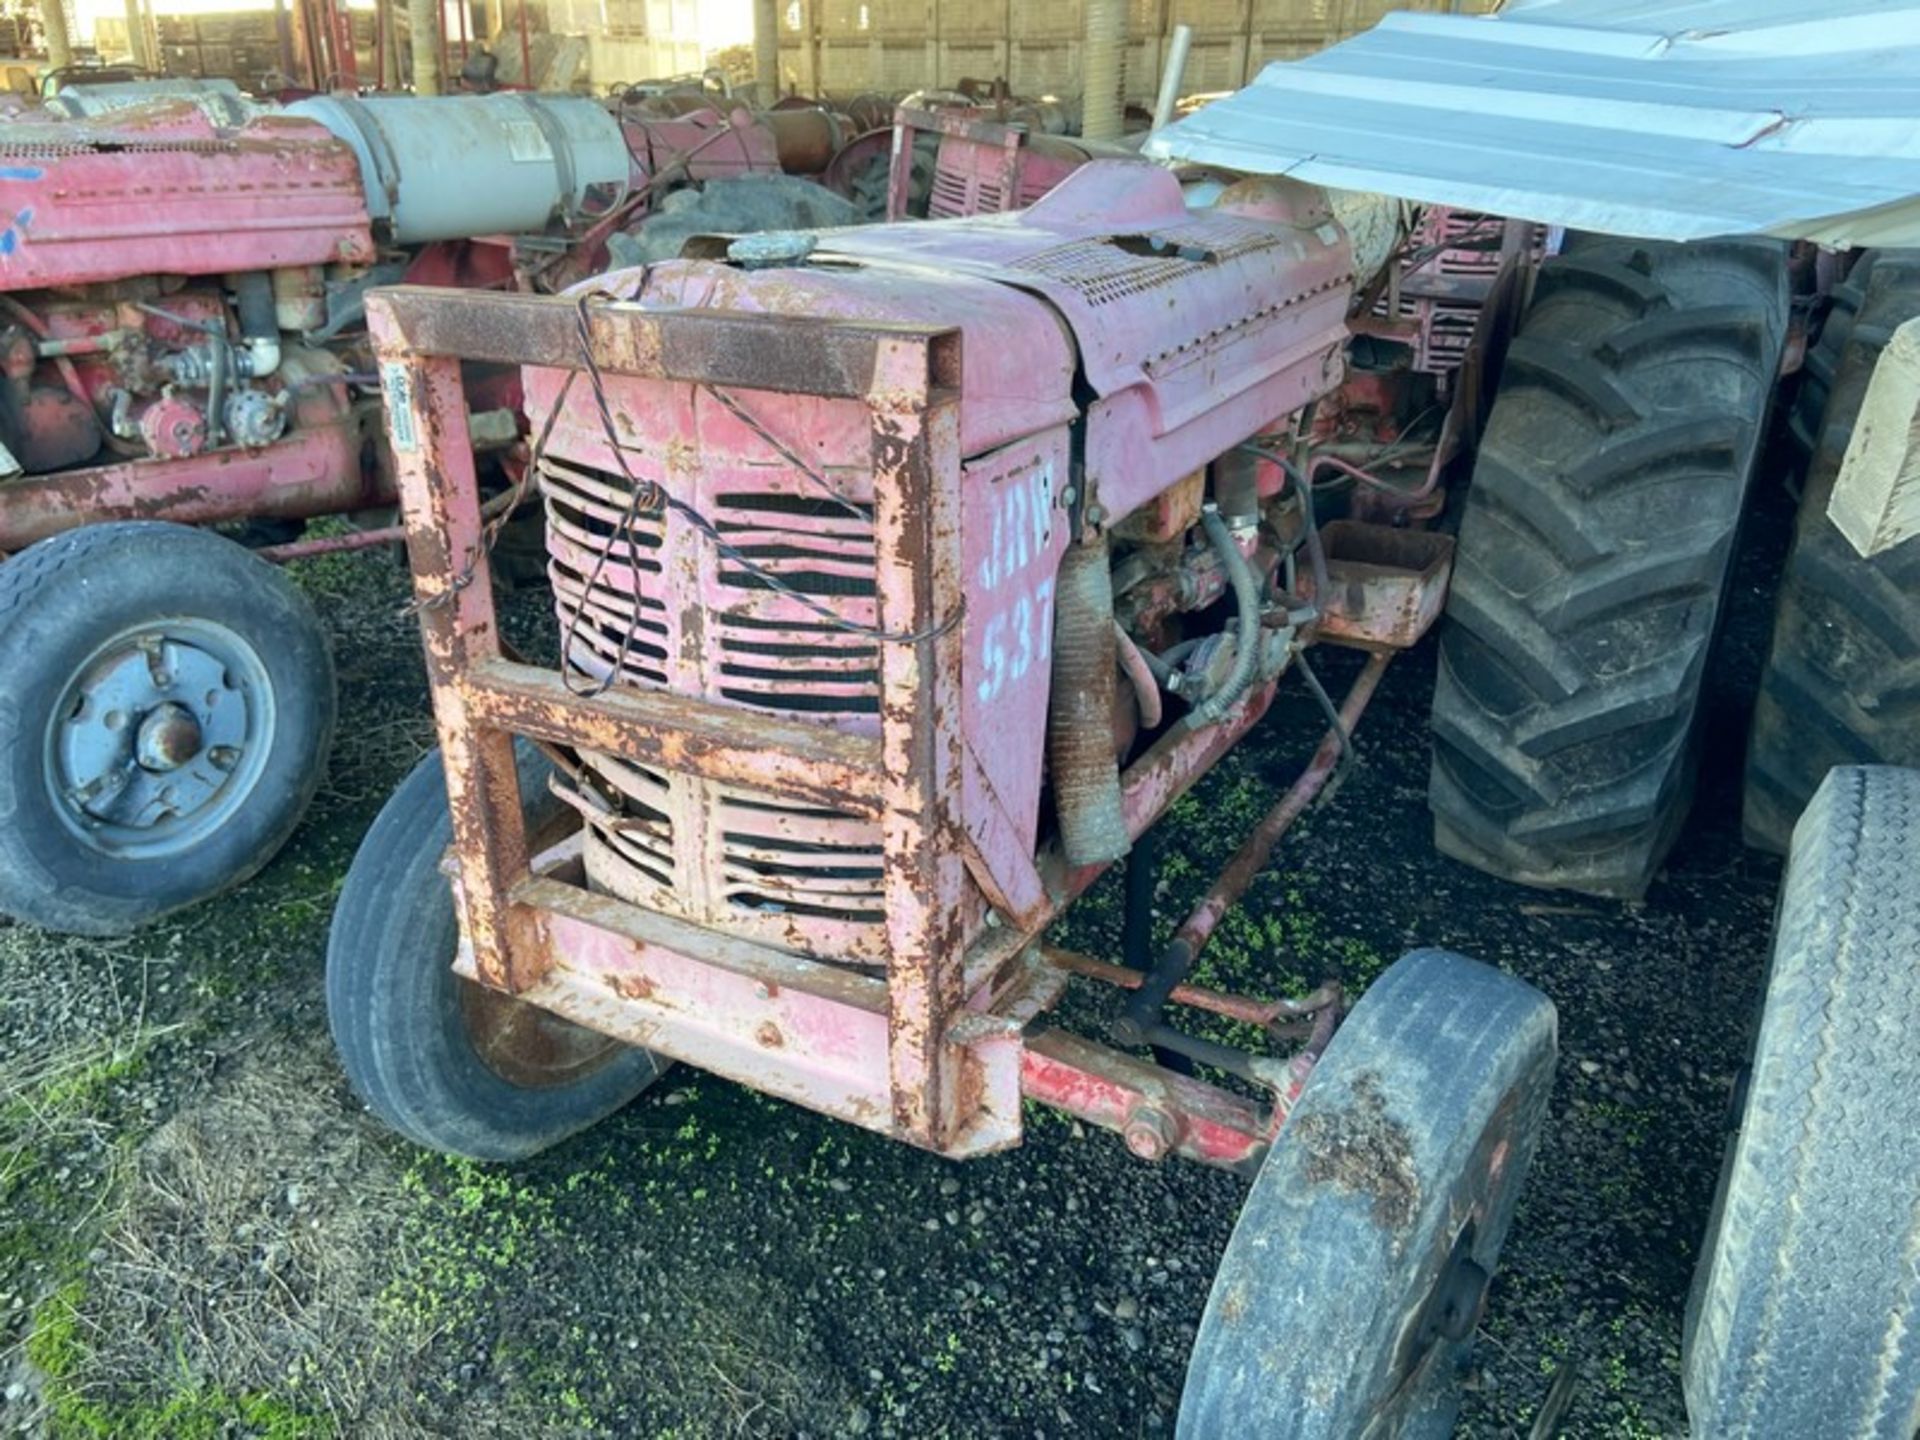 JRW Tractor (Unit 537)(LOCATED IN ATWATER, CA) - Image 2 of 3